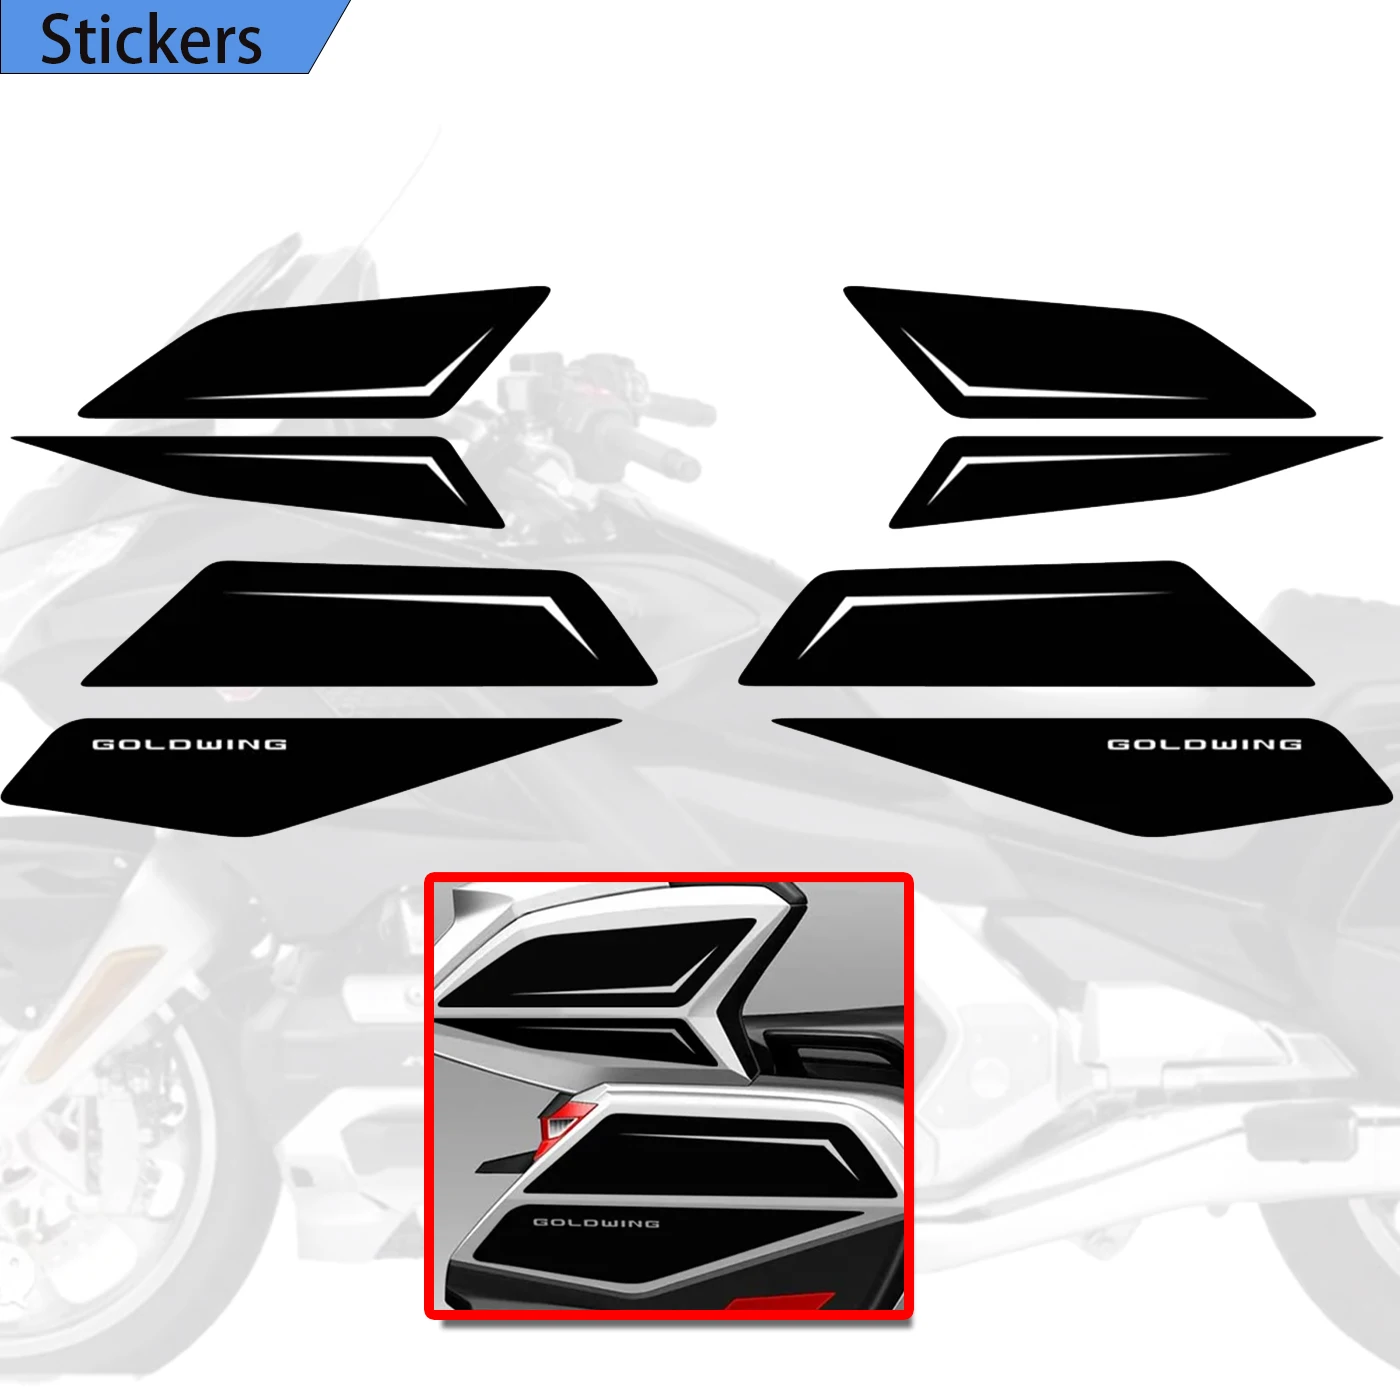 Decals For HONDA Goldwing GL1800 GL 1800 Tour Trunk Luggage Cases Tank Pad Protection Emblem Badge Logo car lock cylinder for honda 2003 2008 city trunk replacement door lock cylinder